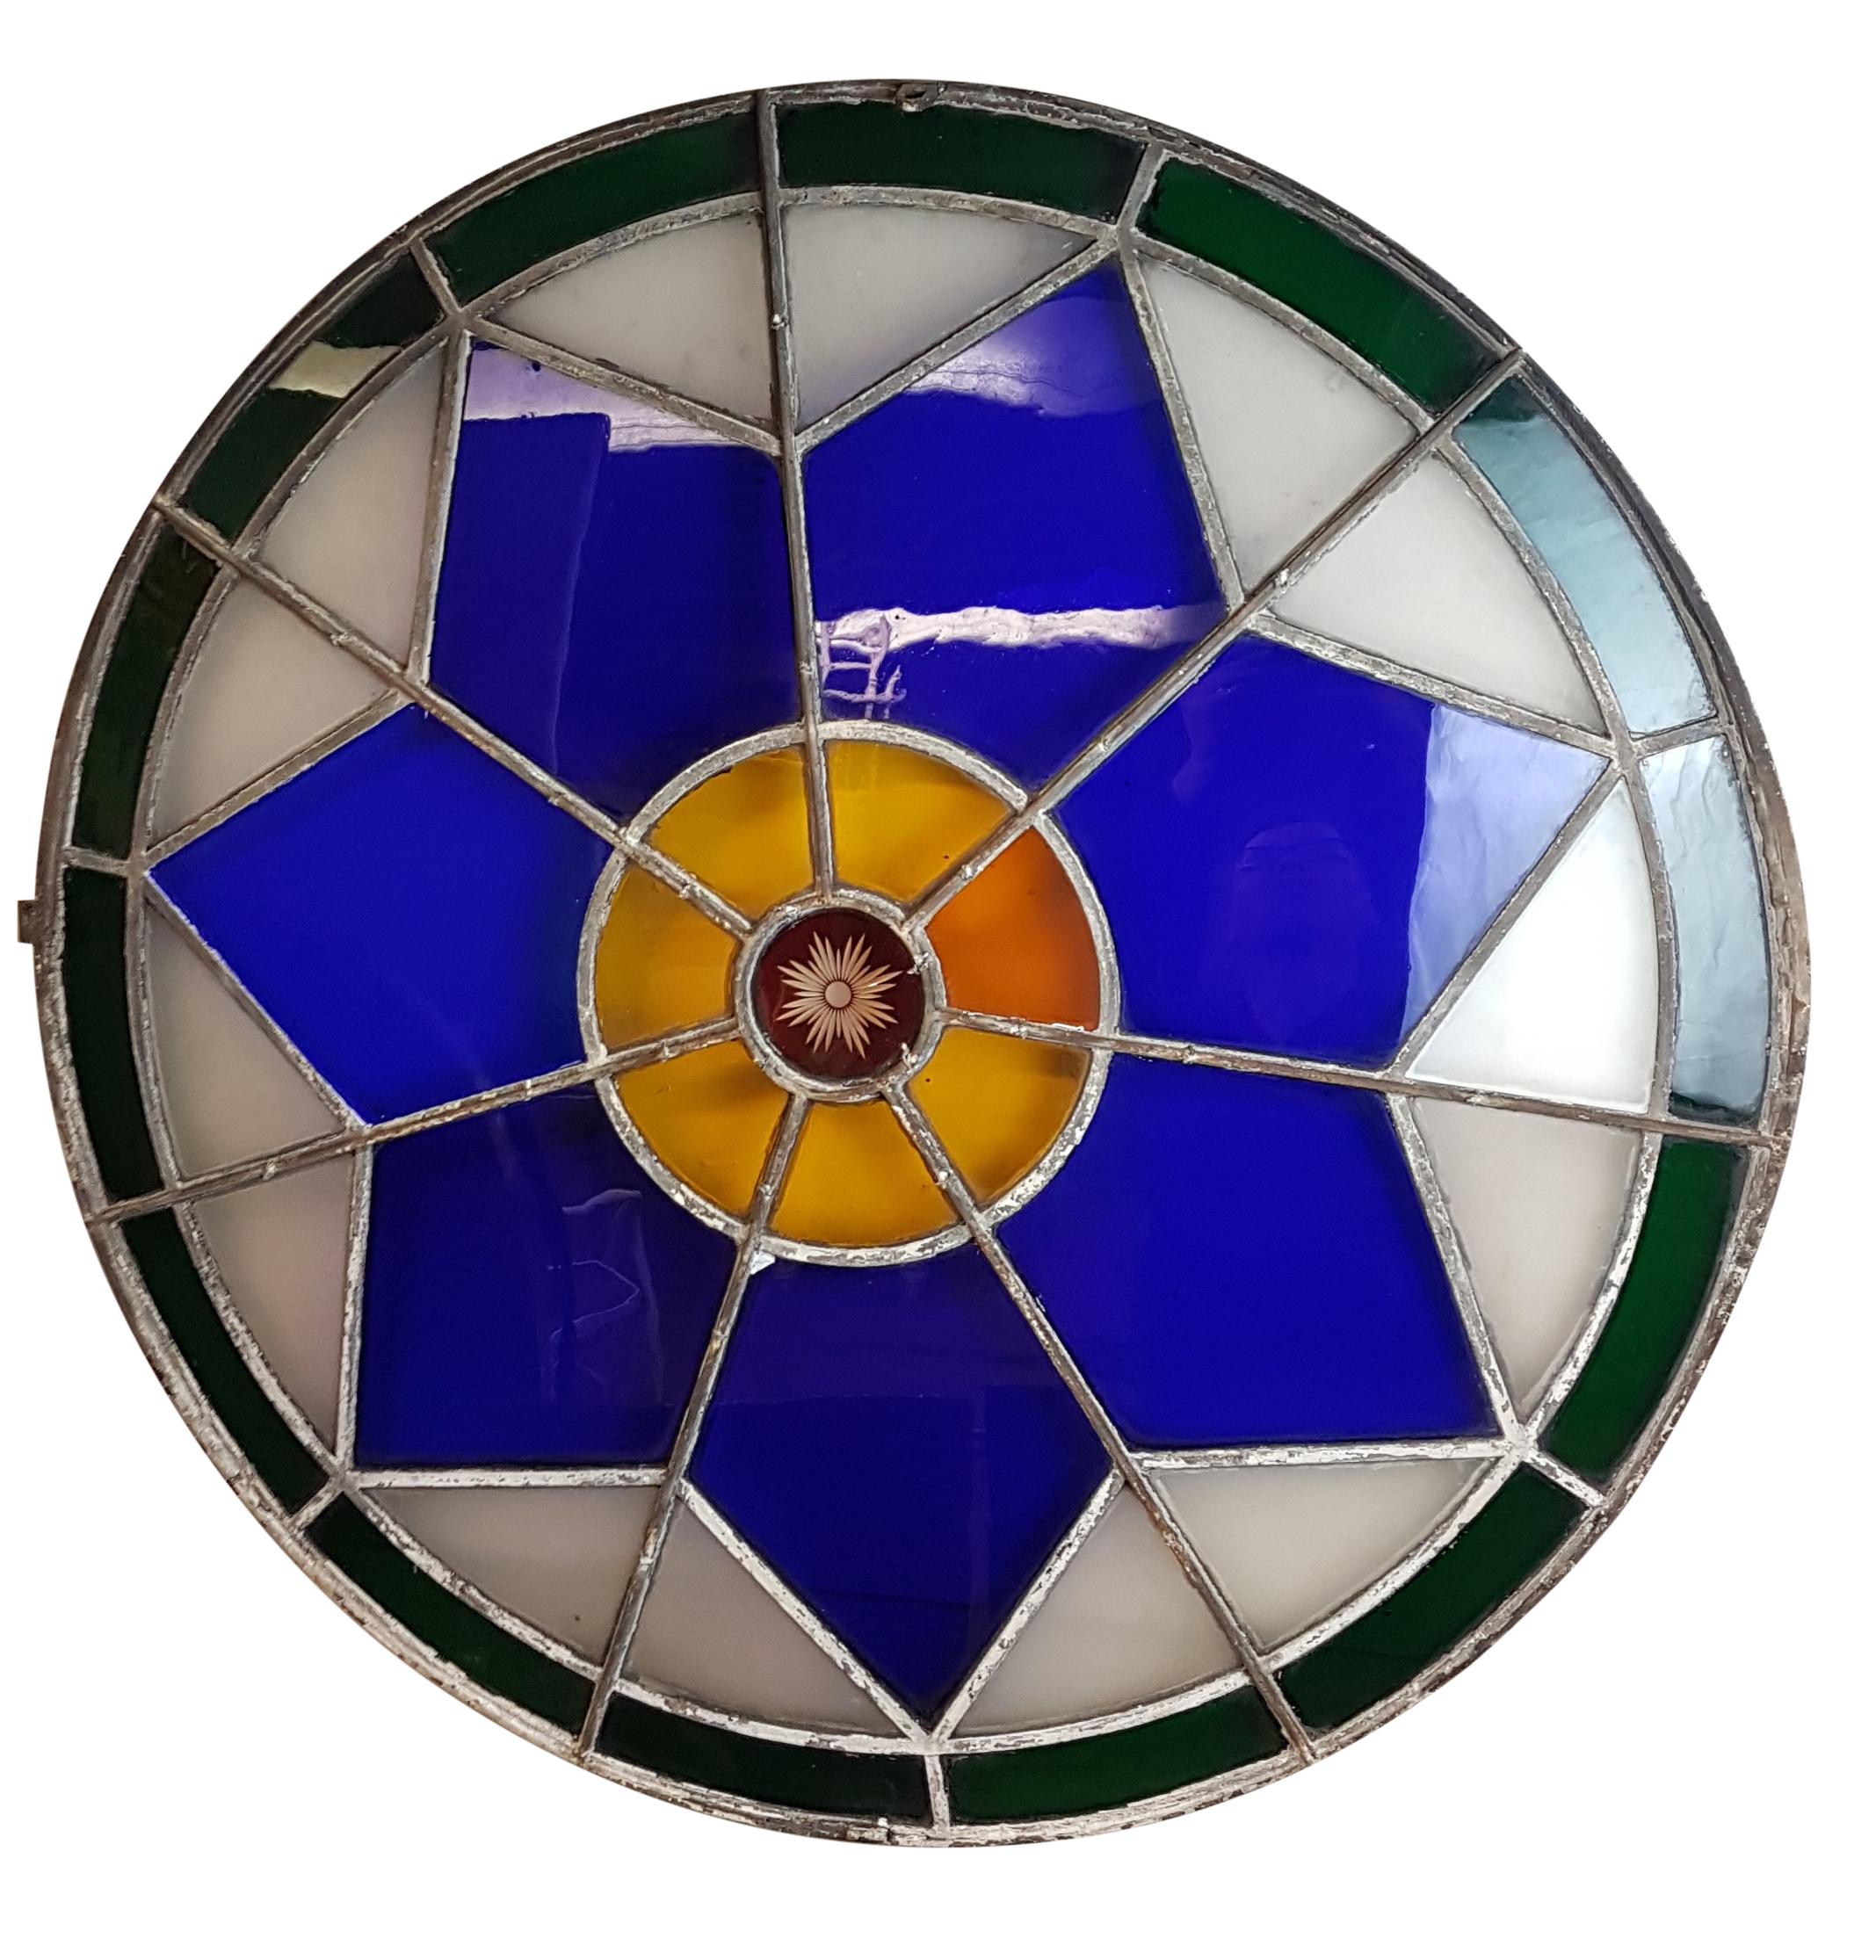 A truly stunning large original 19th century leaded stained glass circular window with cast iron frame. Majority of the glass is original with great rippling, has an etched ruby glass centre surrounded by amber glass (one of which is replaced), this